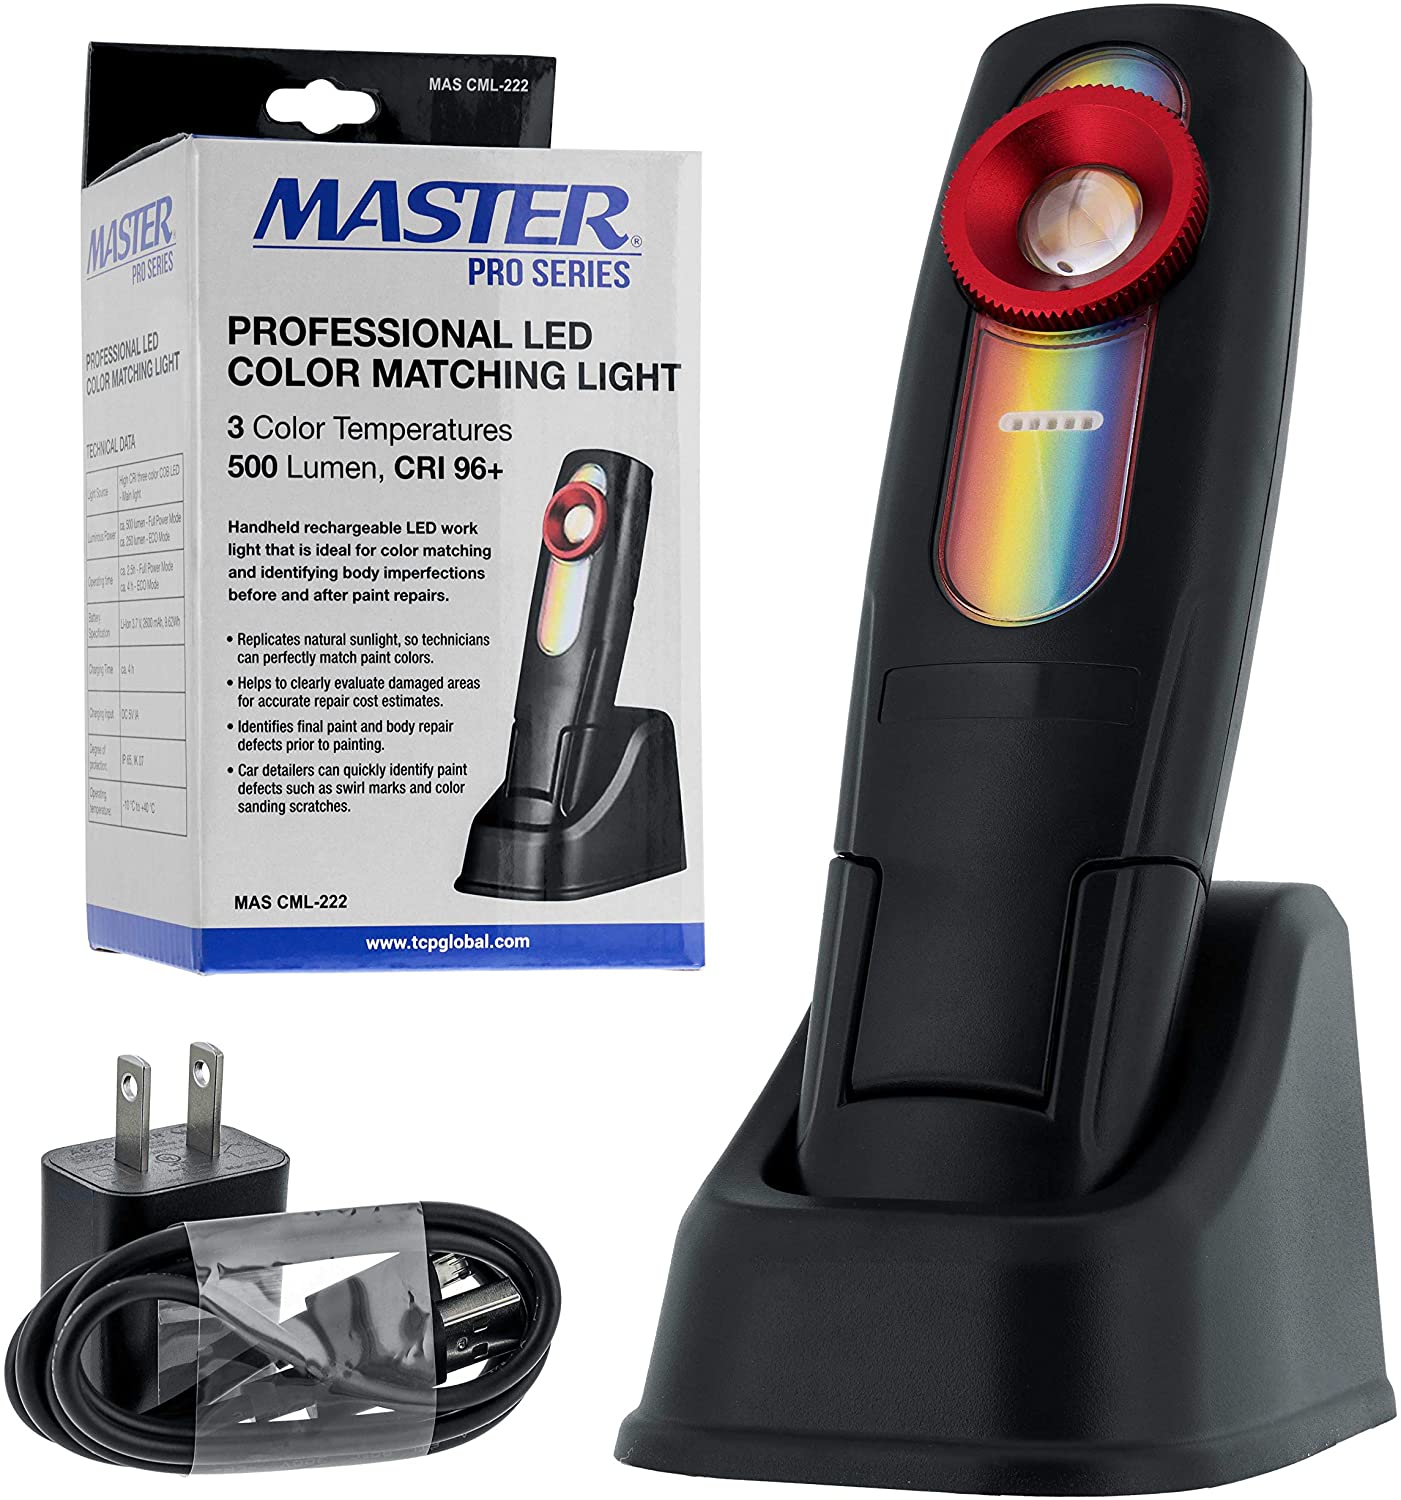 Master Airbrush, Master Pro - LED Color Matching Light, 500 Lumen - Exact Paint Color Match, Replicates Natural Sunlight for Perfect Match - 3 Color Temperatures, Handheld Rechargeable Work Light, Bodyshop Car Repair